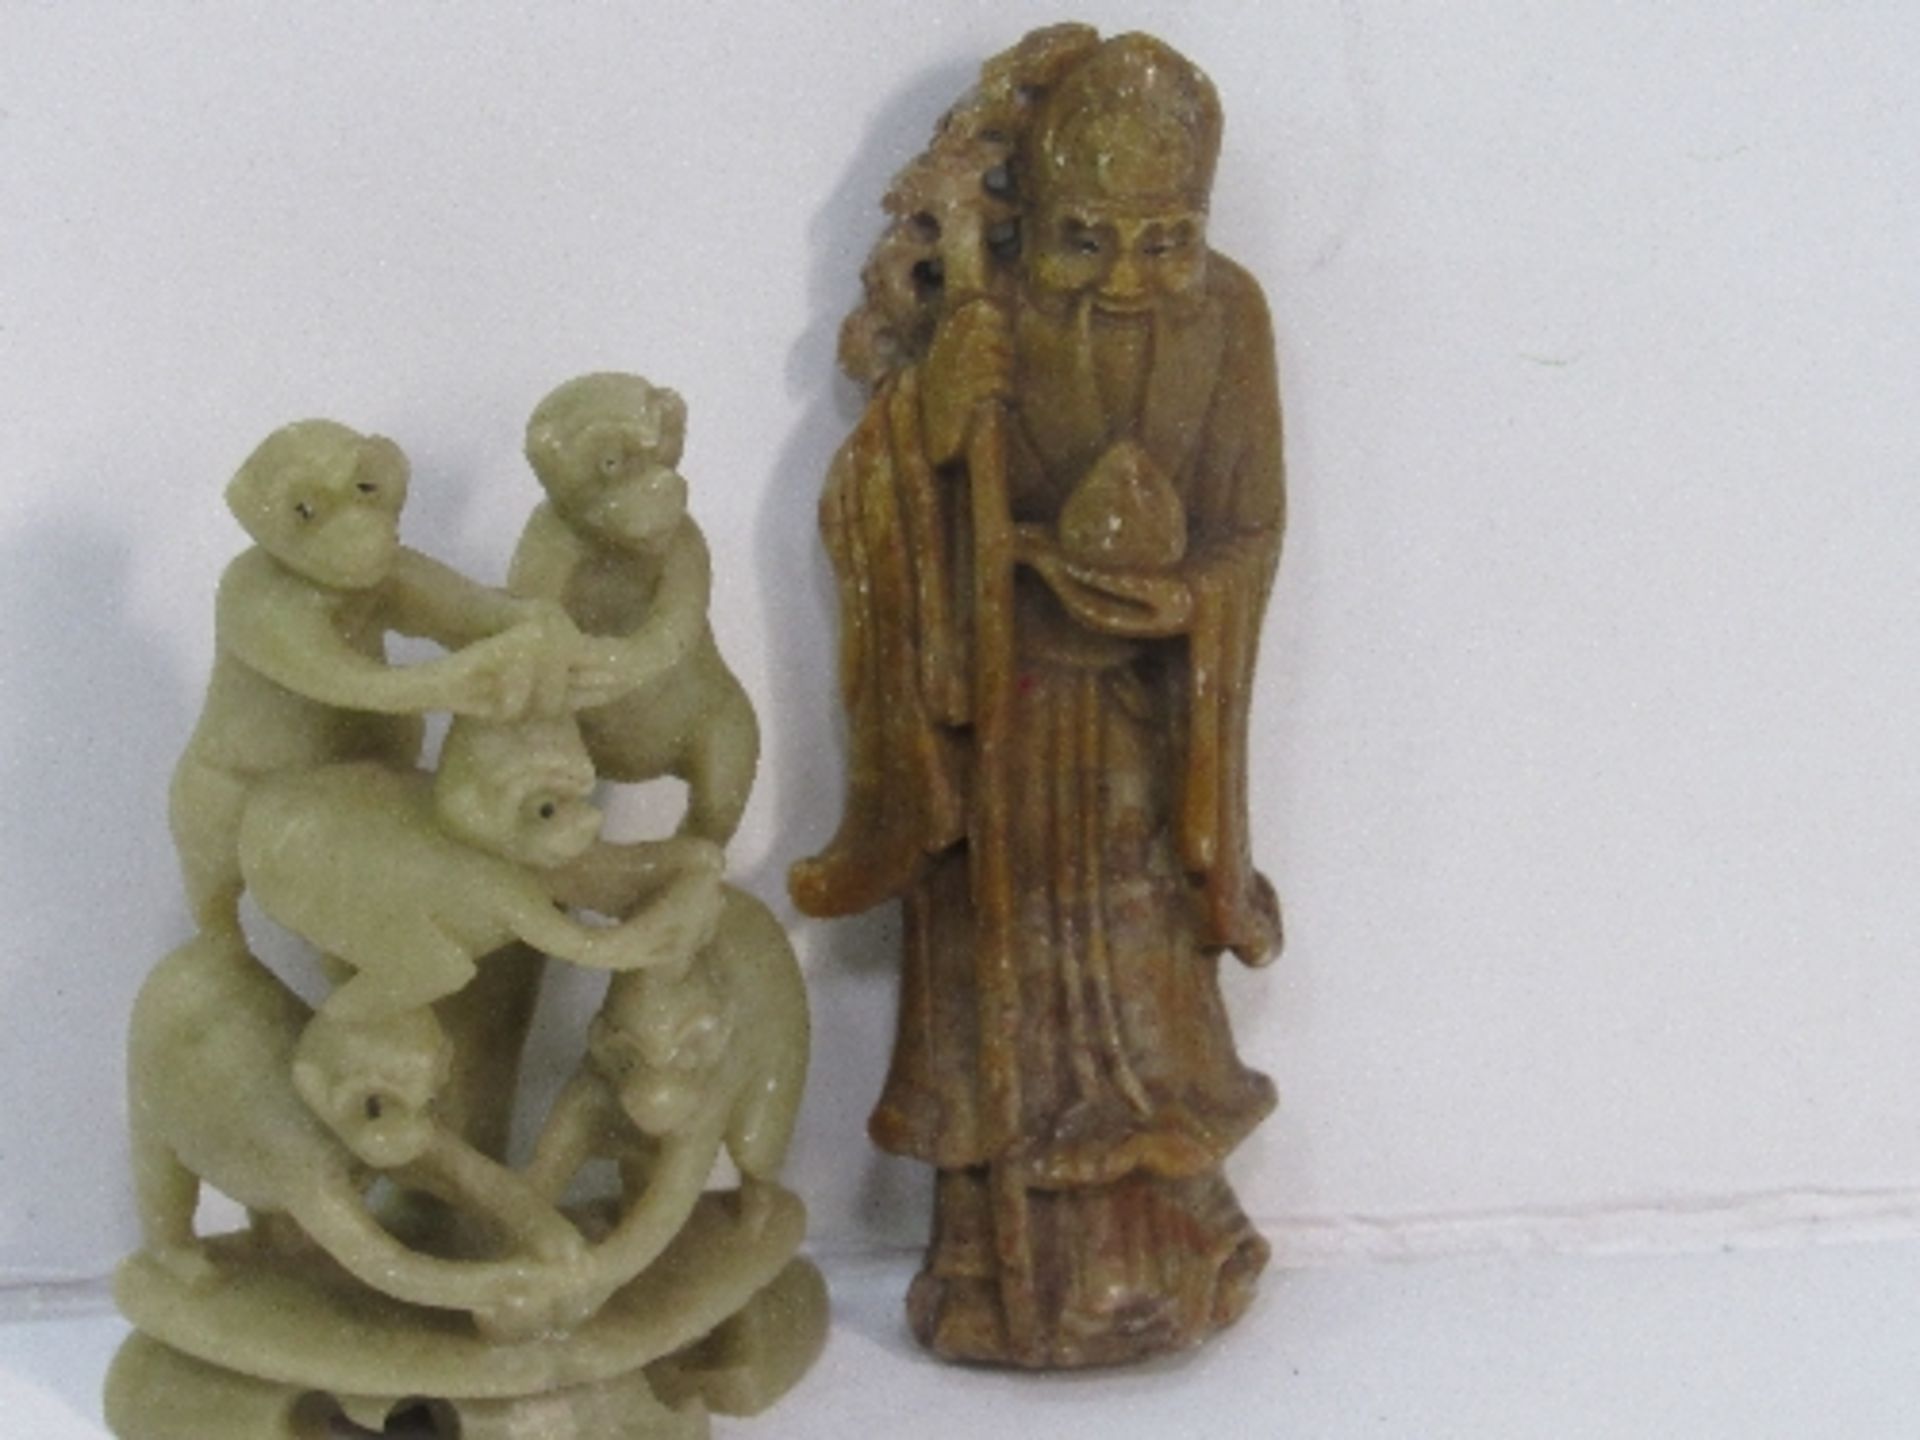 2 oriental stone carved figurines: 1 of an old gentleman & the other a group of monkeys; - Image 3 of 3